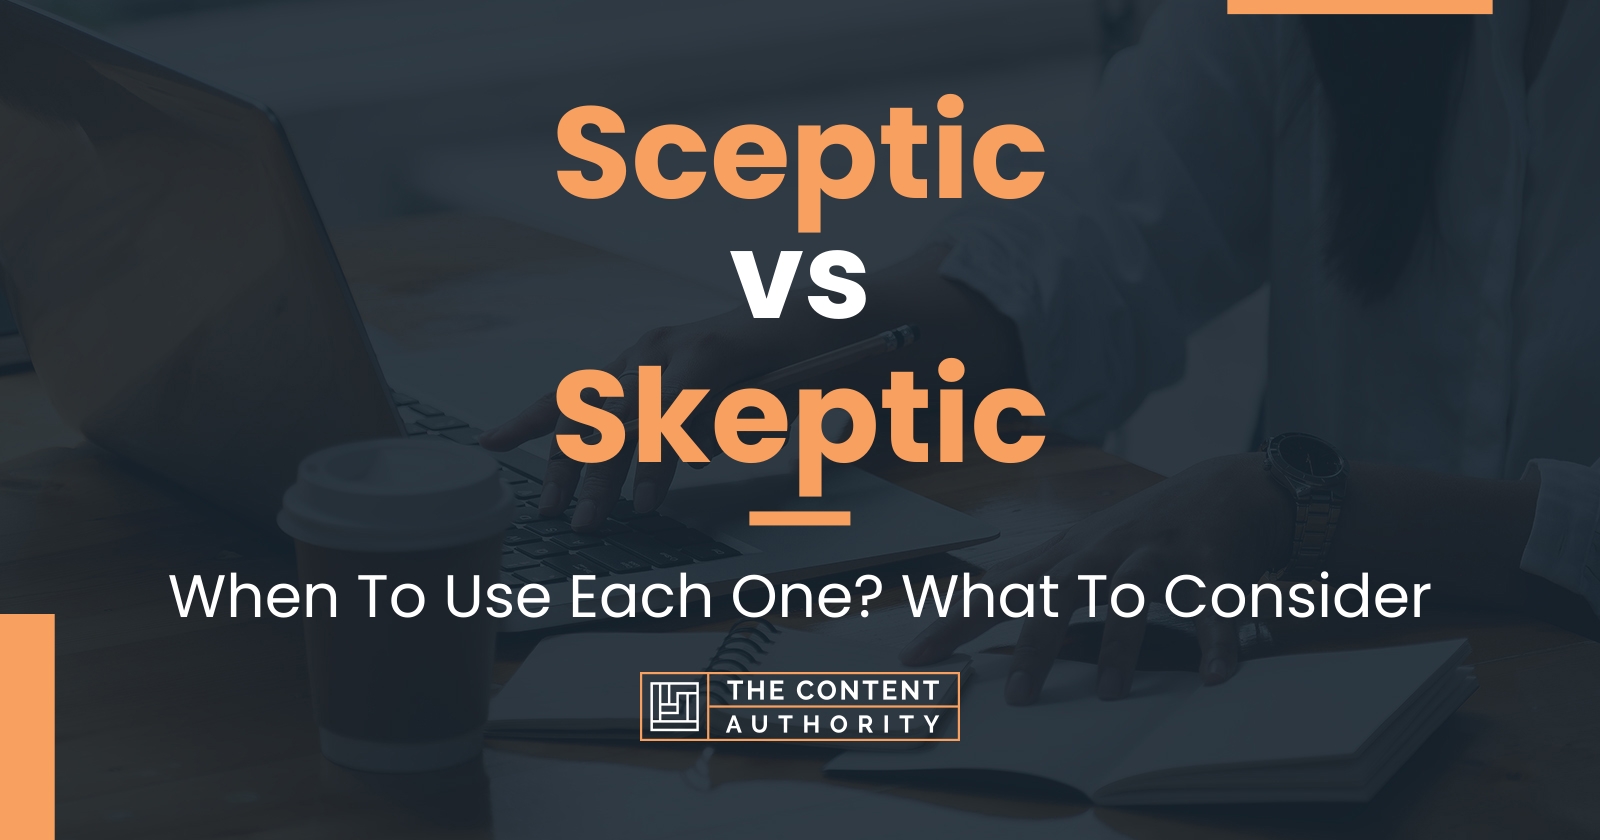 Sceptic vs Skeptic: When To Use Each One? What To Consider